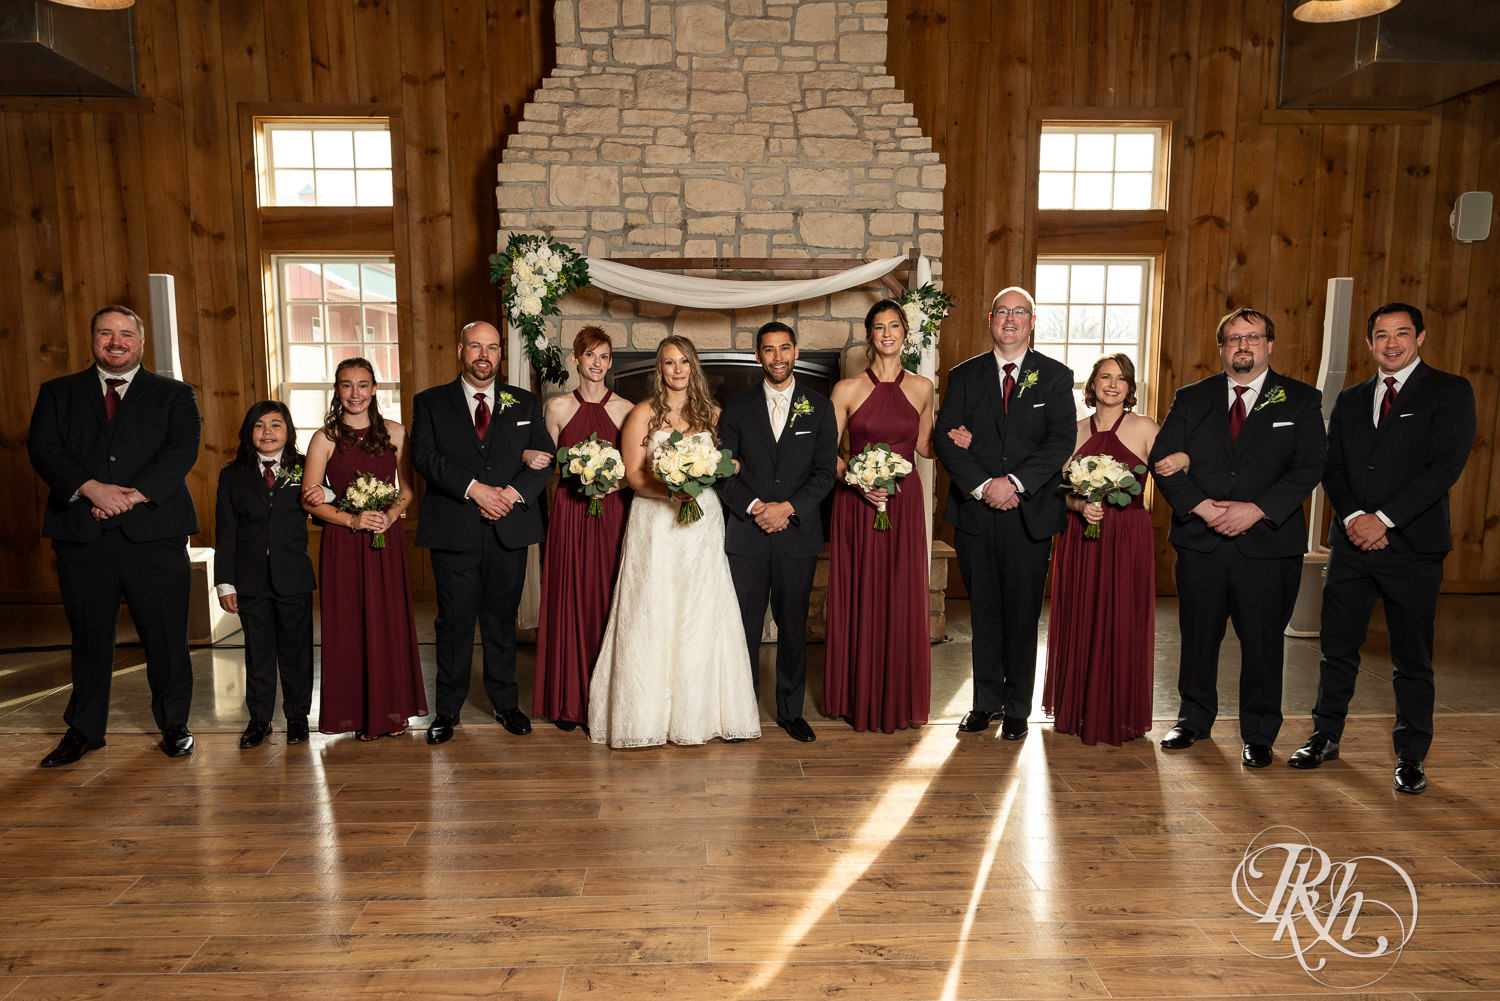 Bride and groom smile with wedding party at Almquist Farm in Hastings, Minnesota.